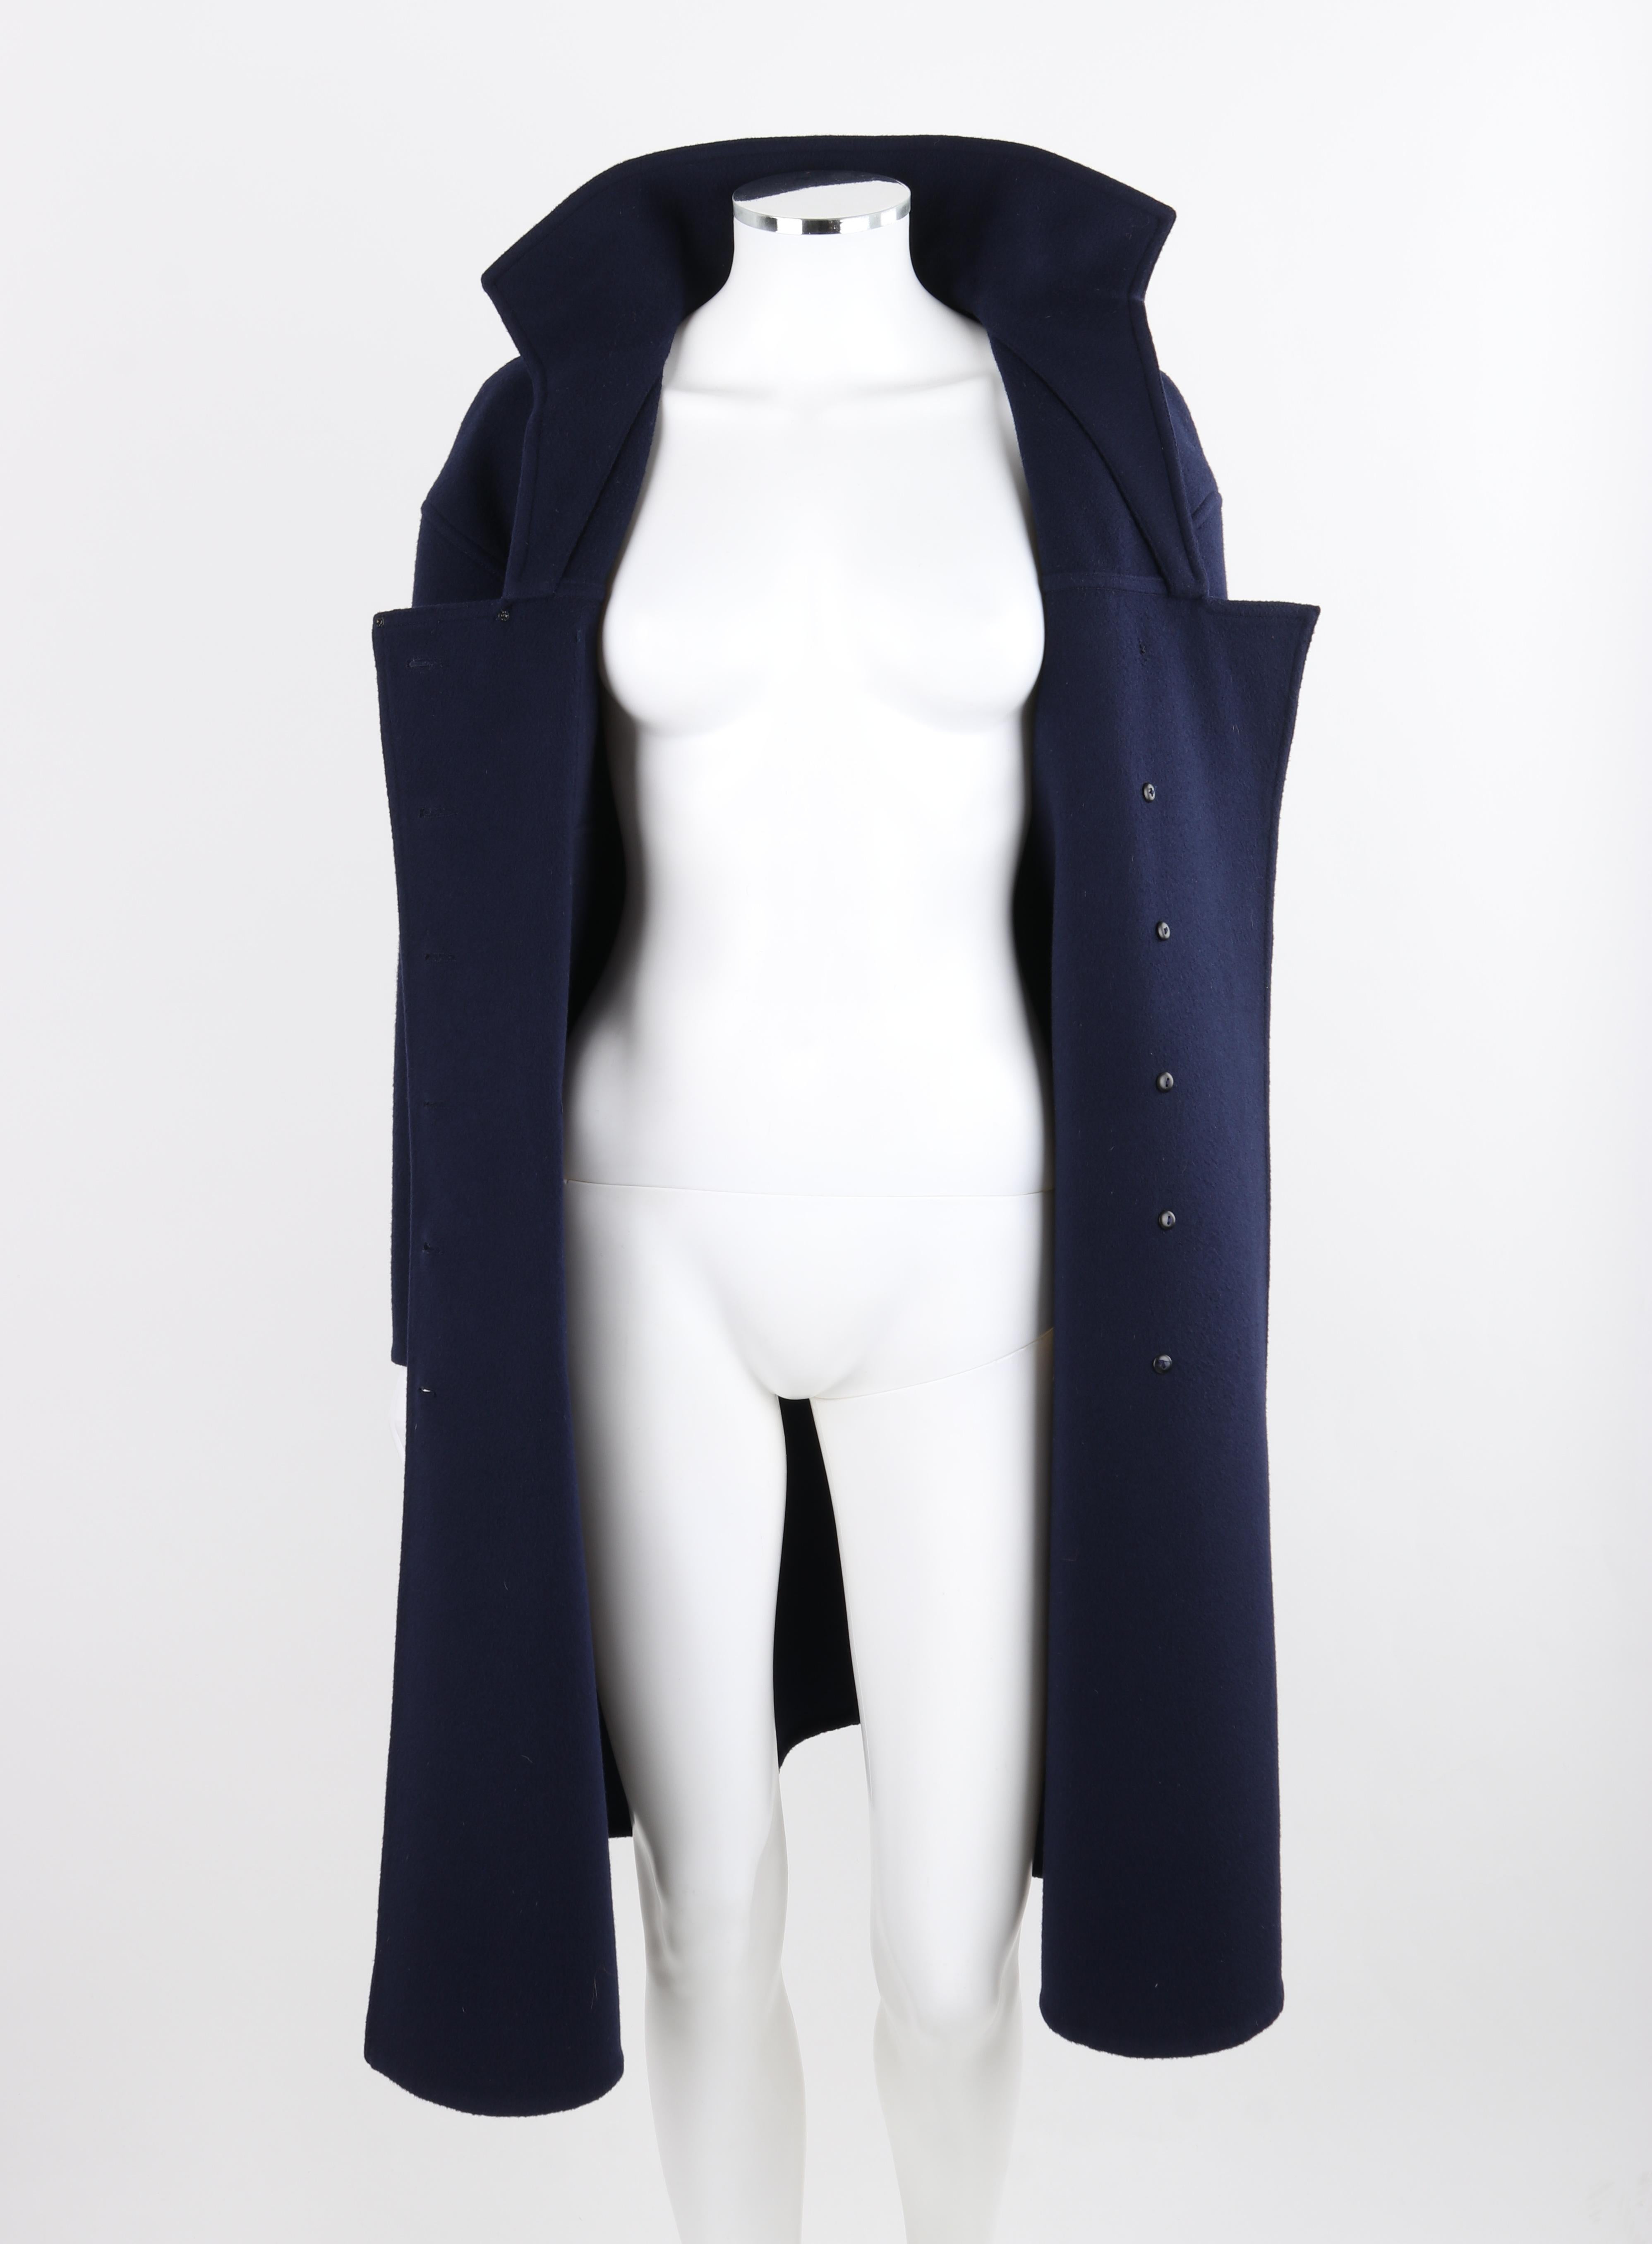 COURREGES c.1970's Couture Future Marine Navy Asymmetrical Button Front Overcoat For Sale 5